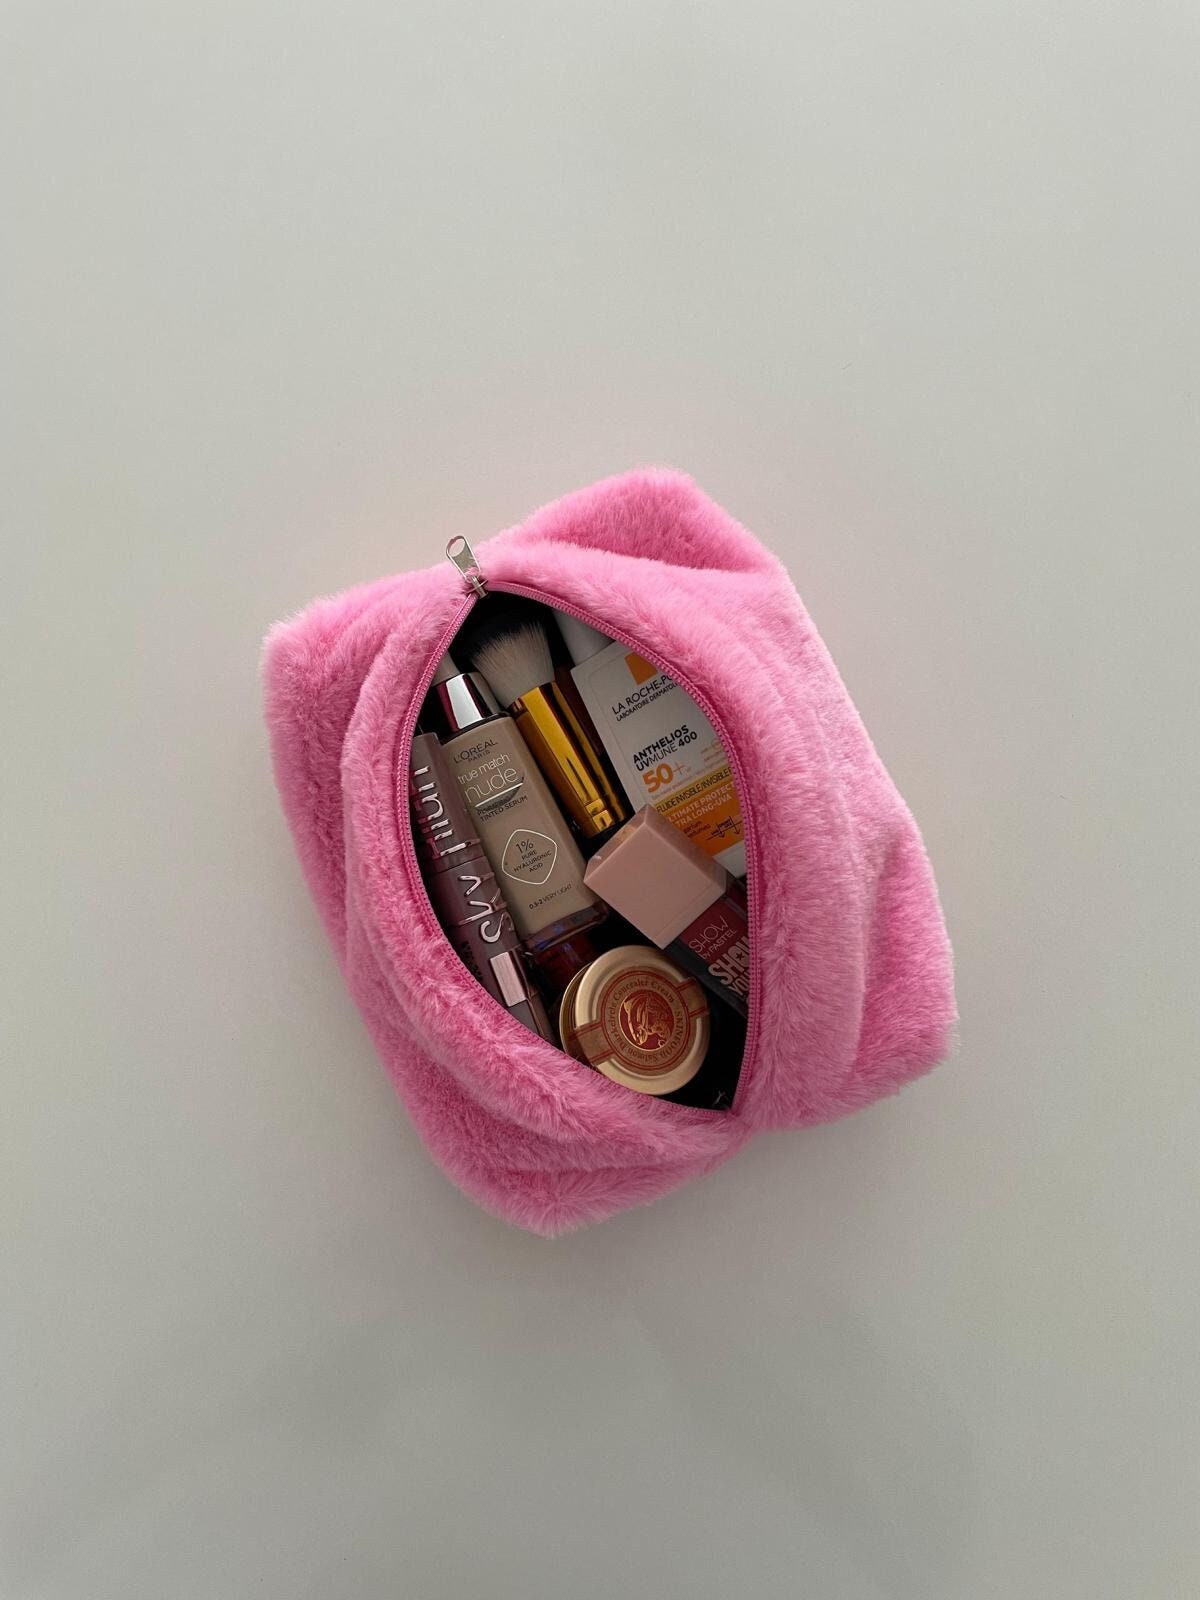 Square Quilted Puffy Plush Cosmetic Multifunction Makeup Bag